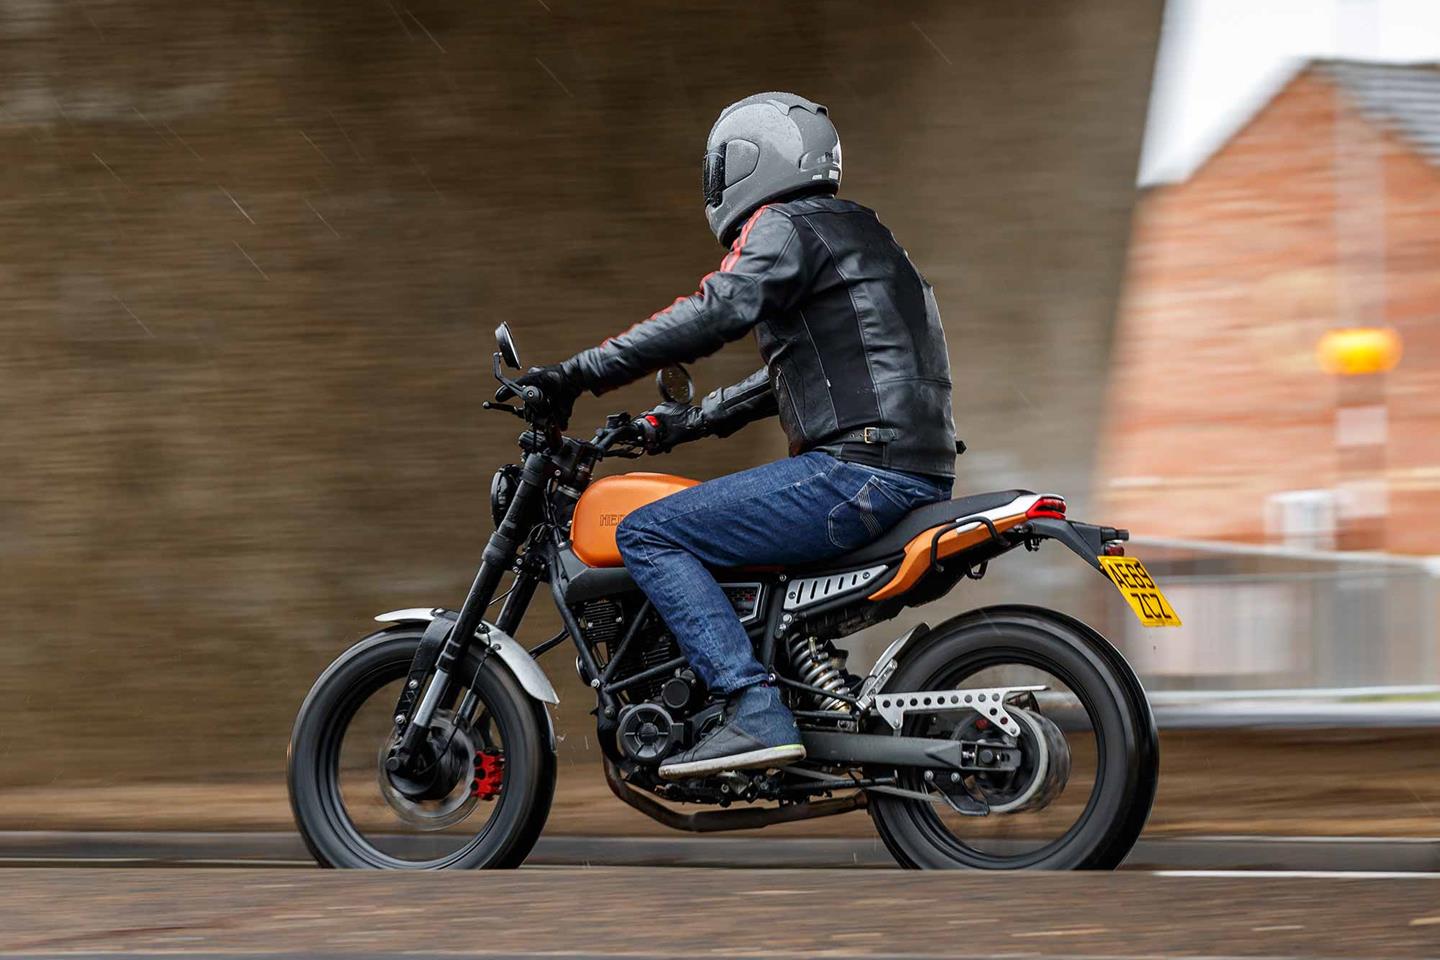 HERALD BRAT 125 (2020 - on) Review | MCN